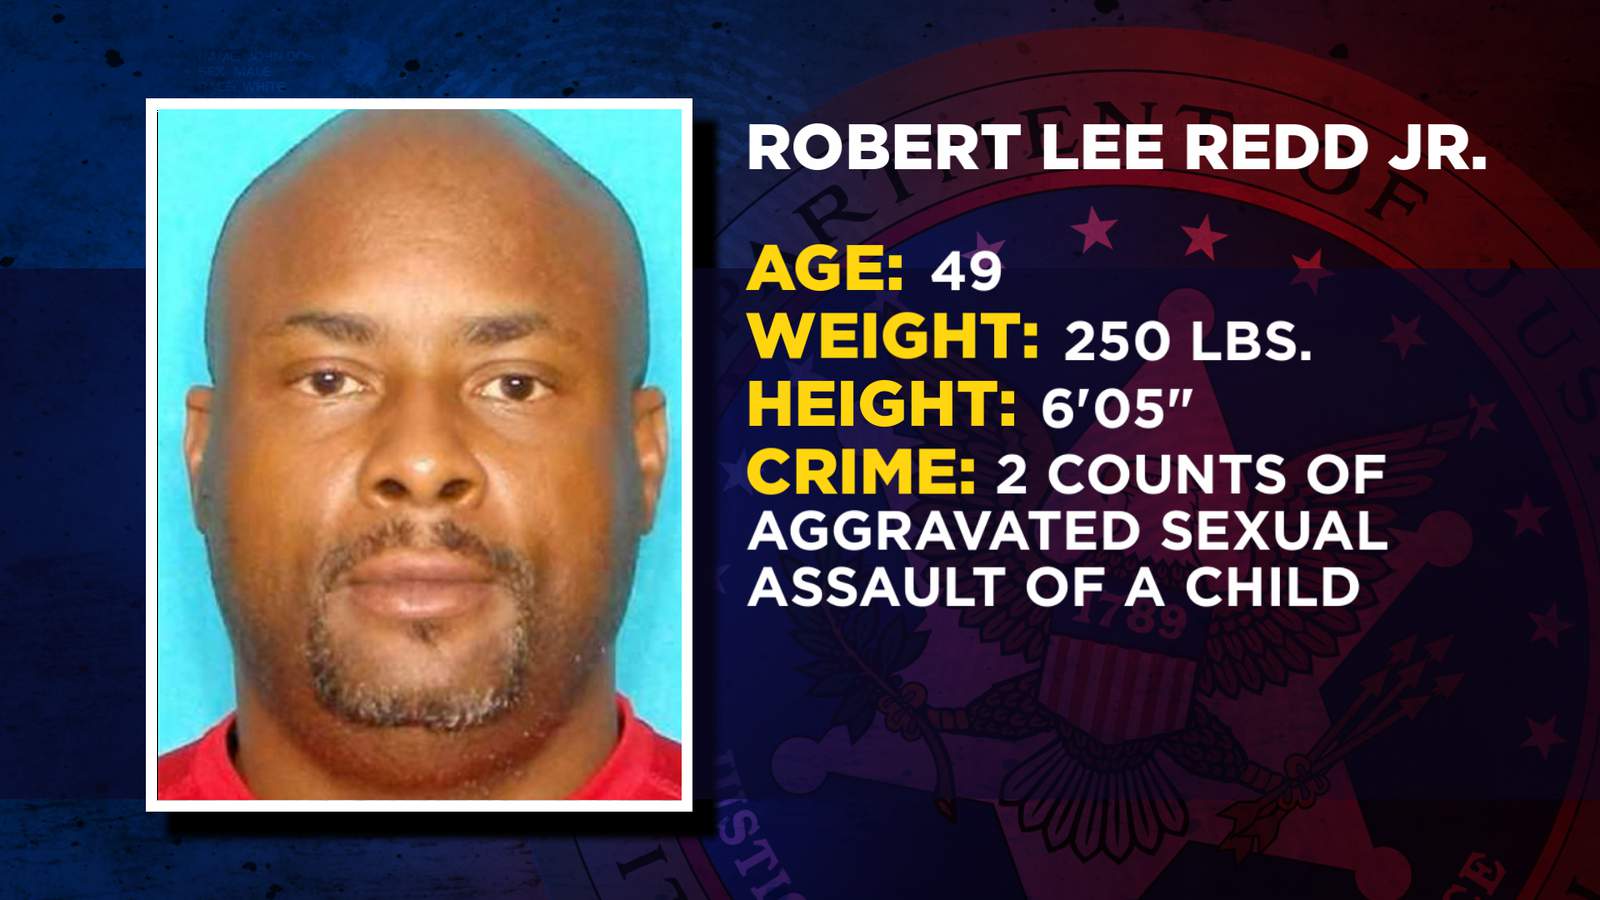 Man wanted on child sex crimes could be in Northeast SA